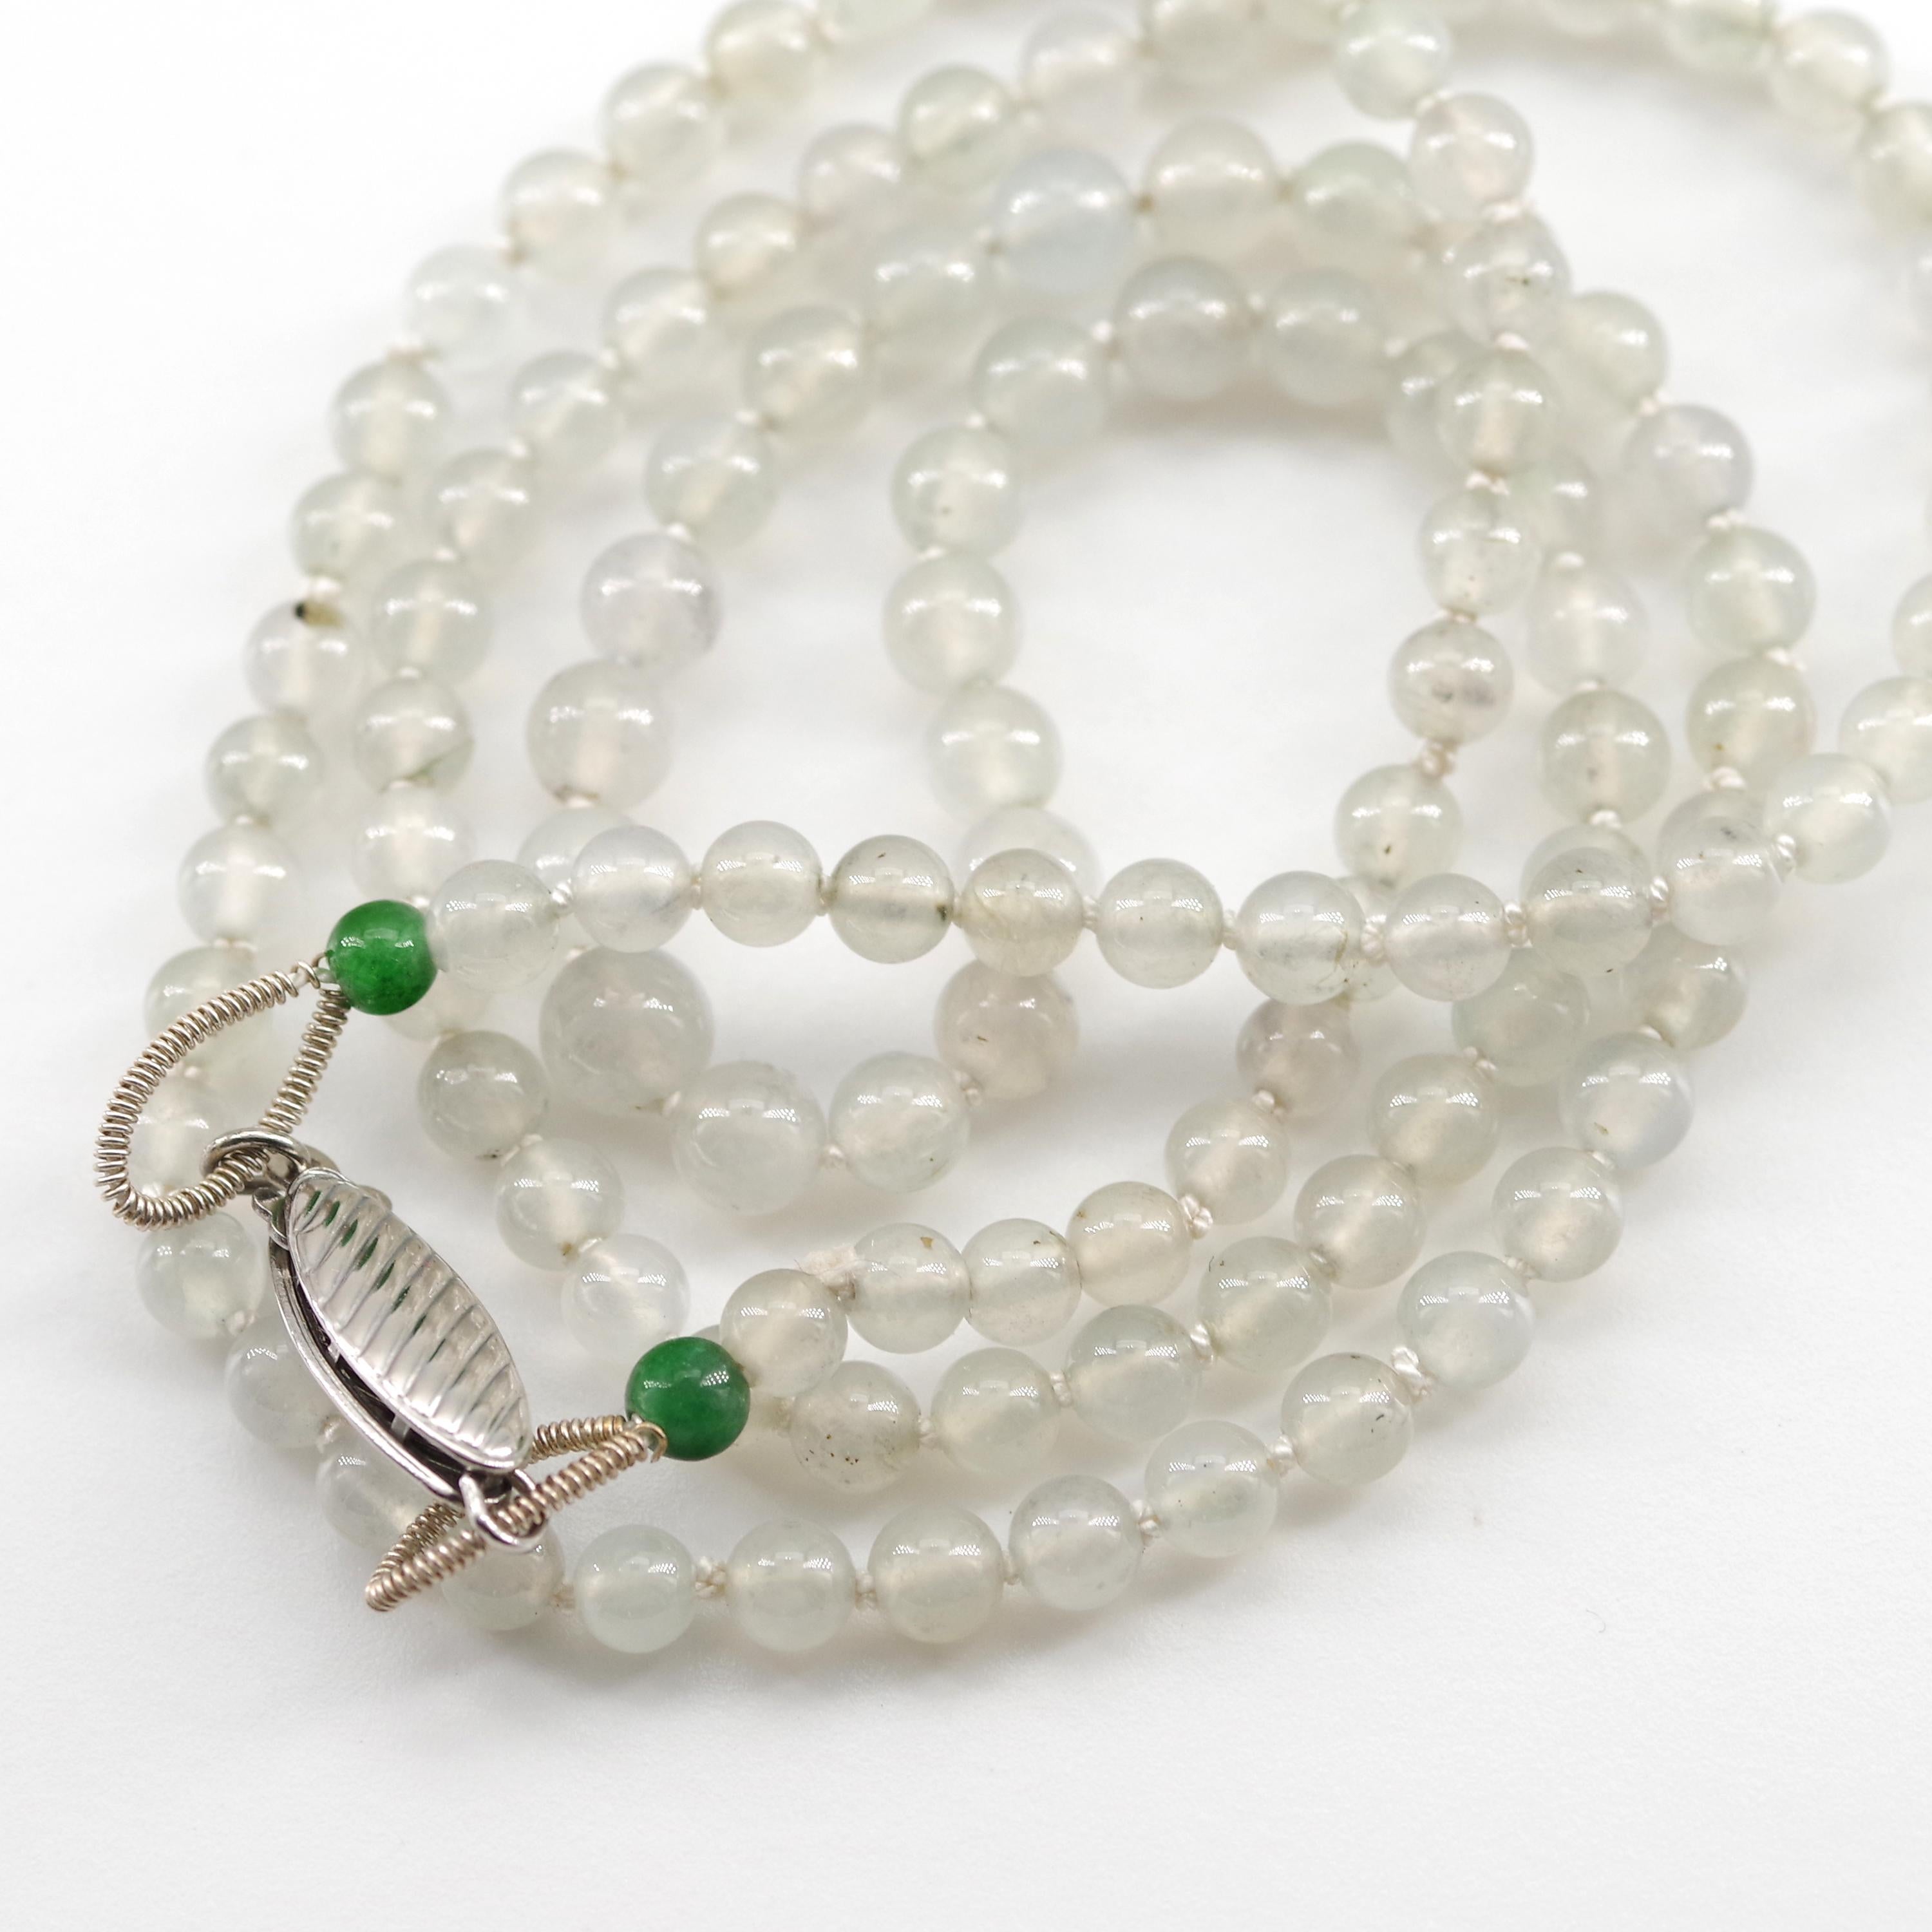 Certified Untreated Glassy and Imperial Jade Necklace with Platinum Clasp 3